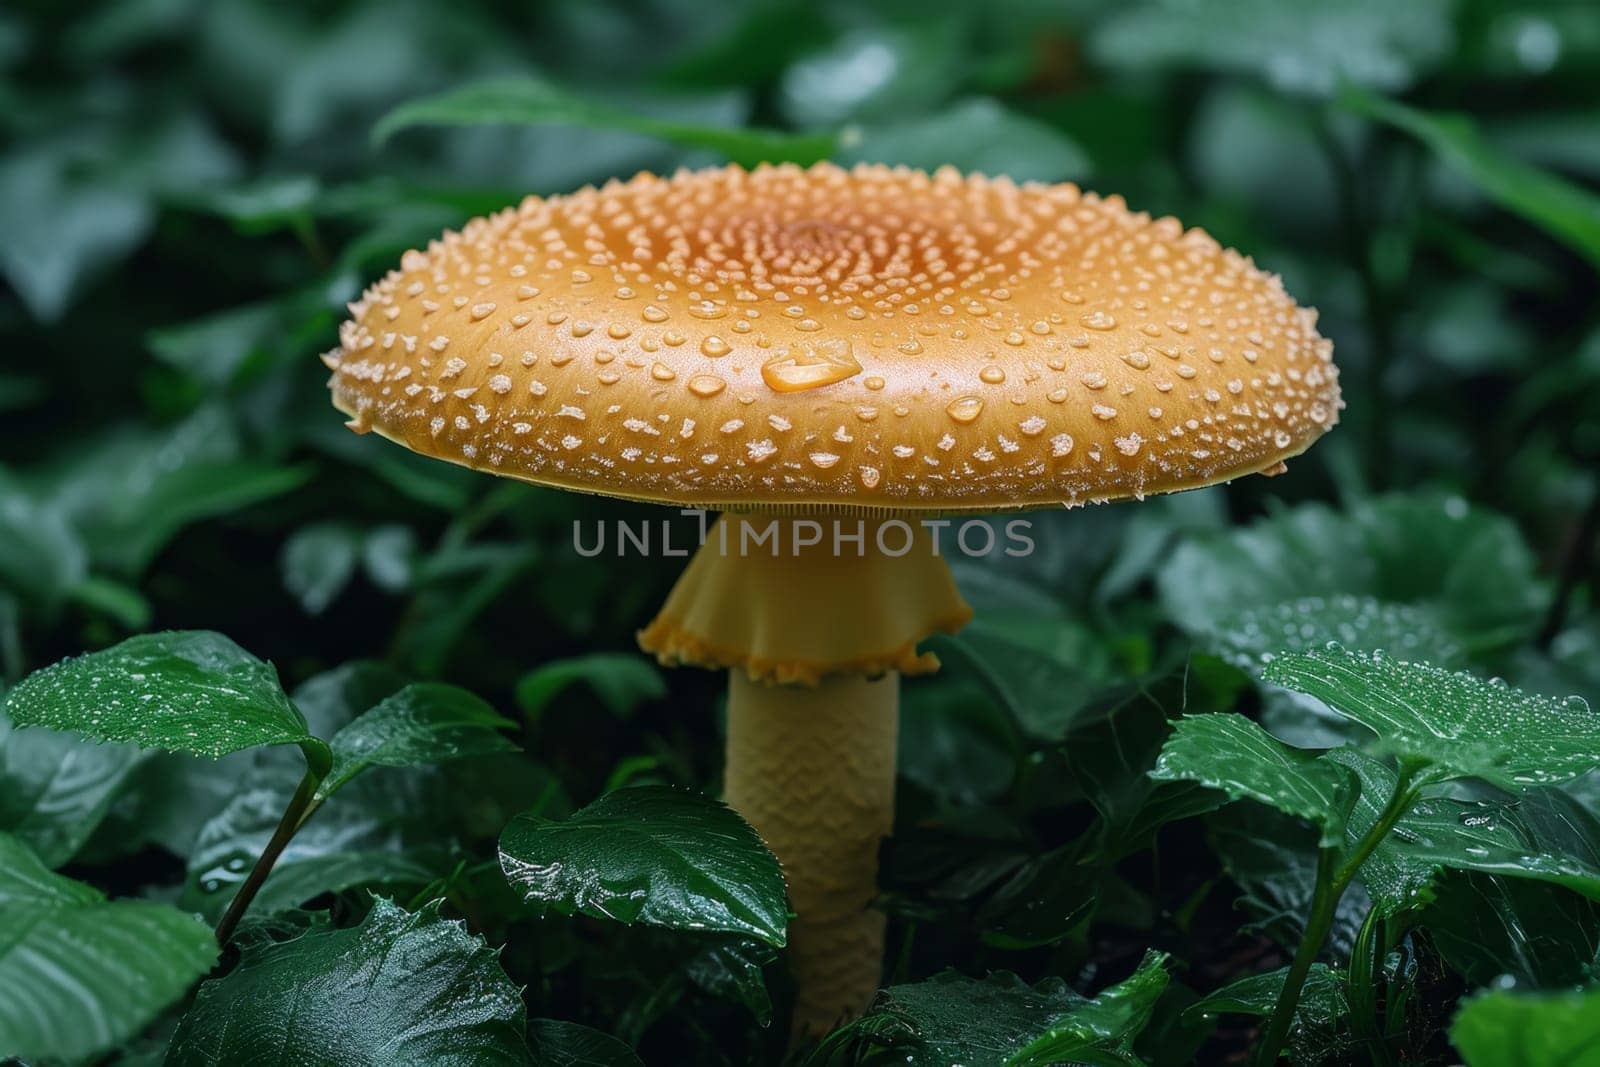 Mushroom fly agaric growing in the forest. Mushroom picking concept.